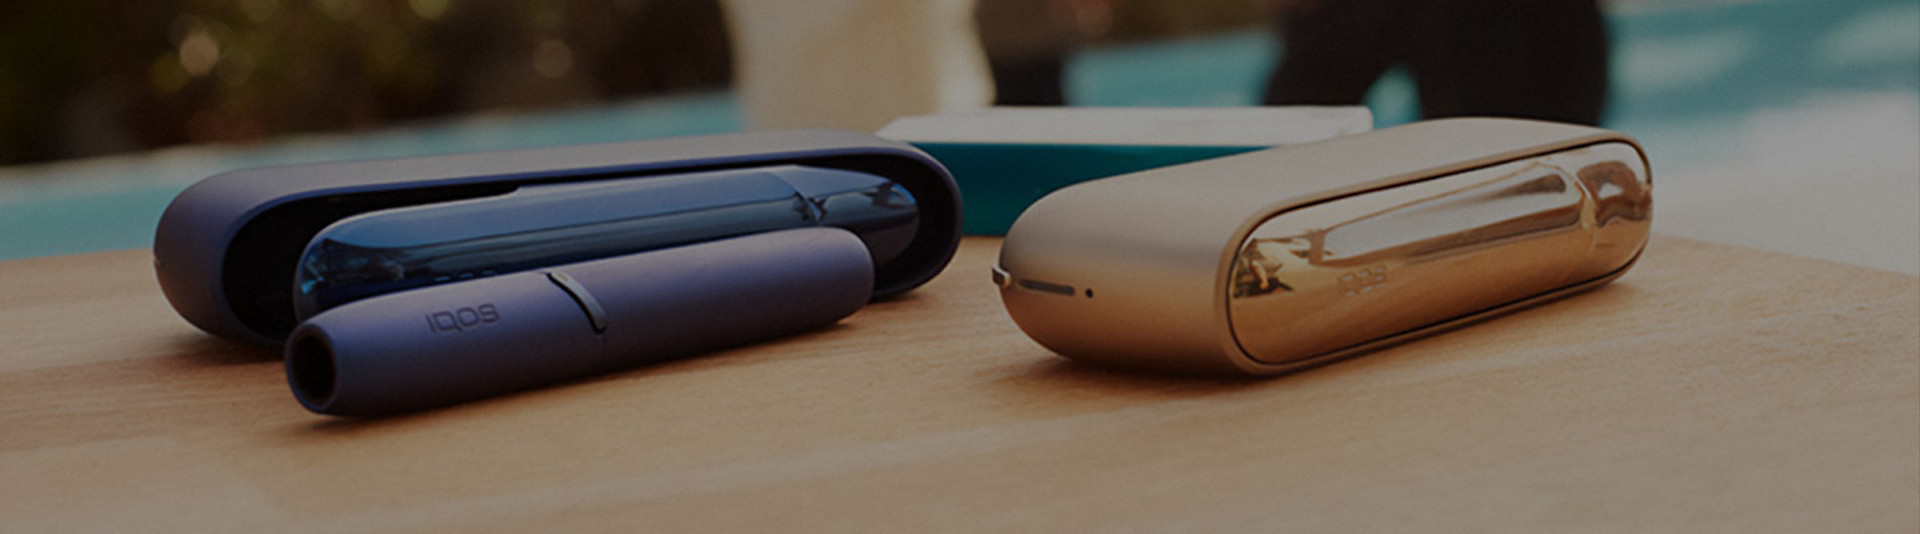 Two IQOS 3 Devices resting on a wooden table, in the blurred background we can see a group of people